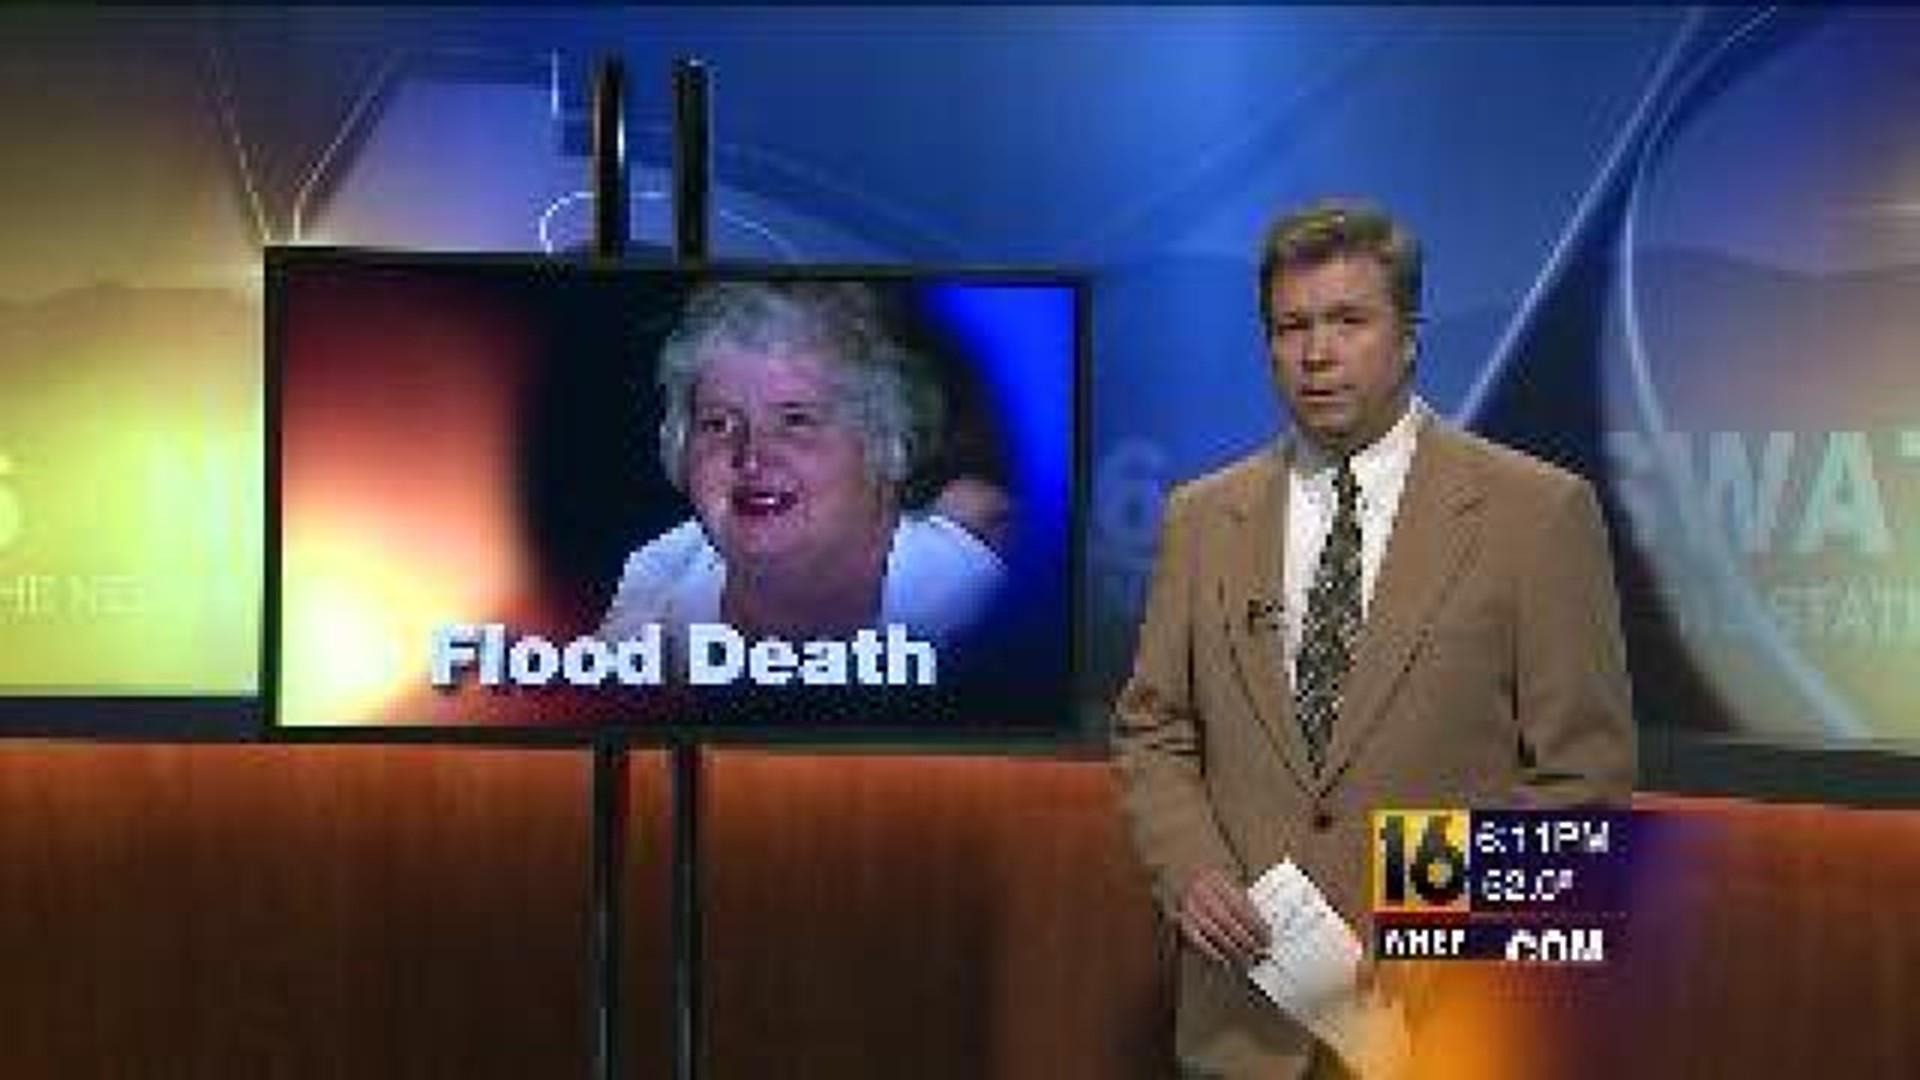 Update to Lawsuit on Death During 2011 Flood